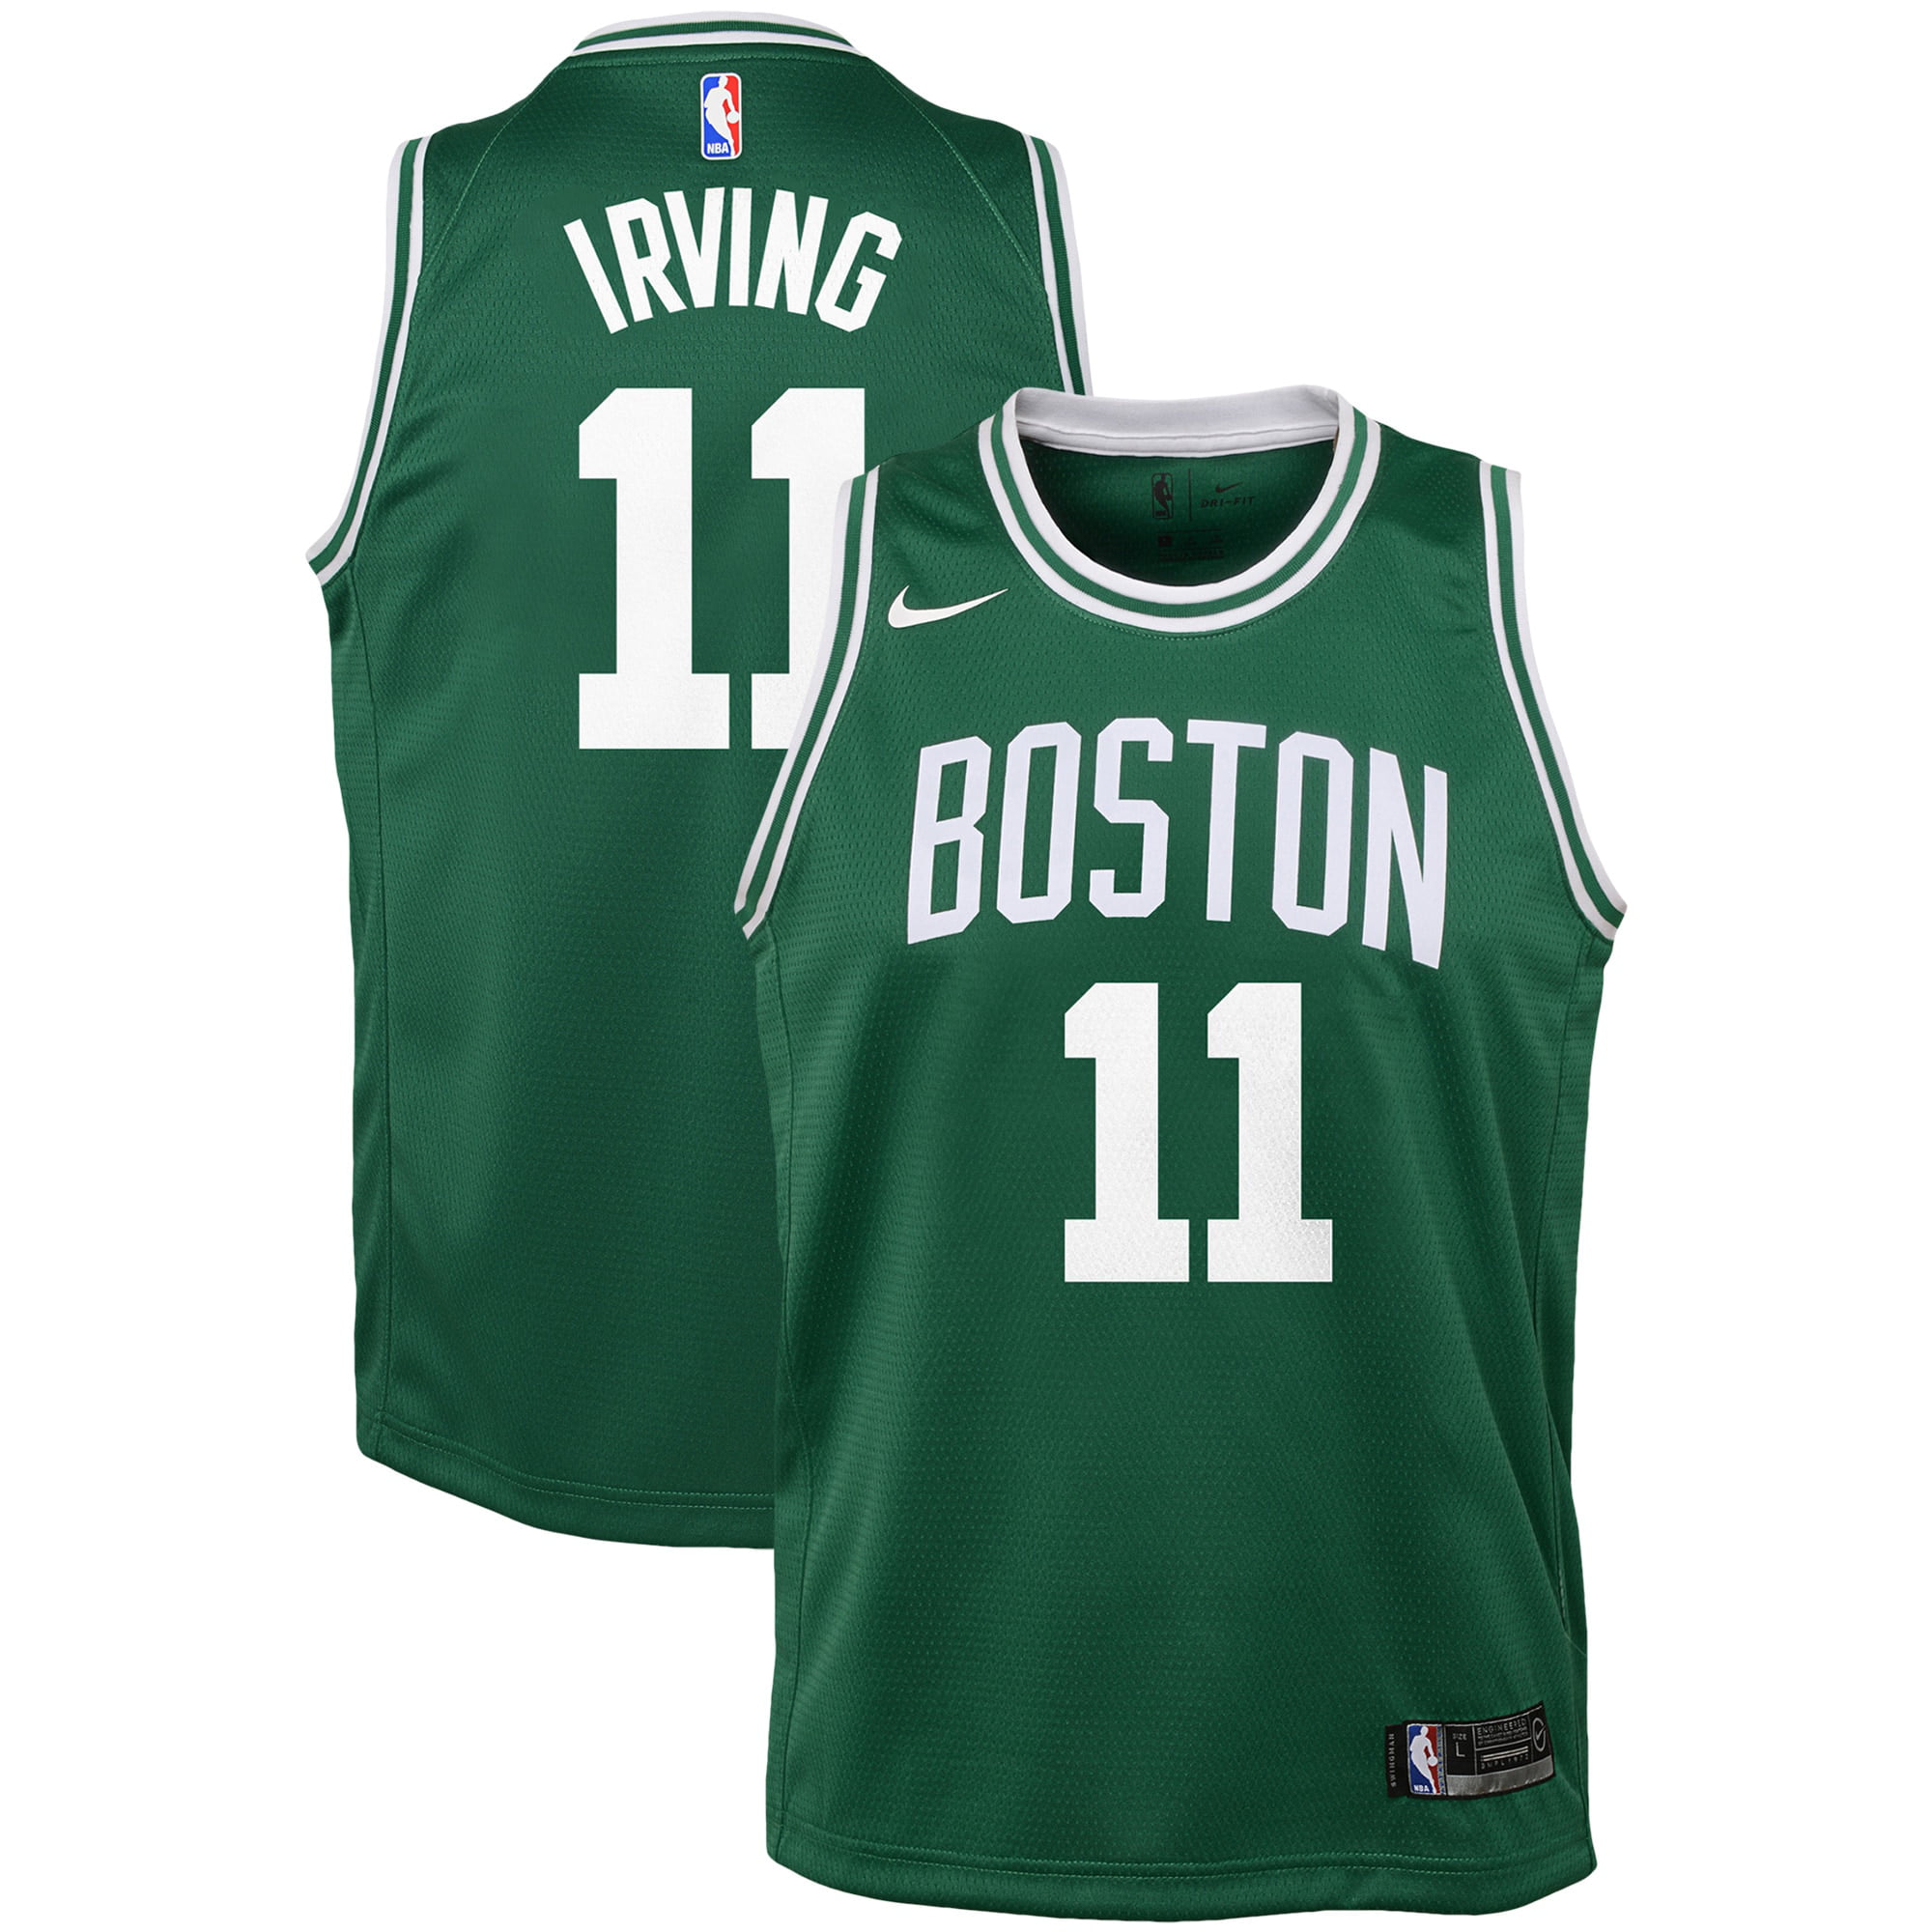 youth kyrie irving jersey